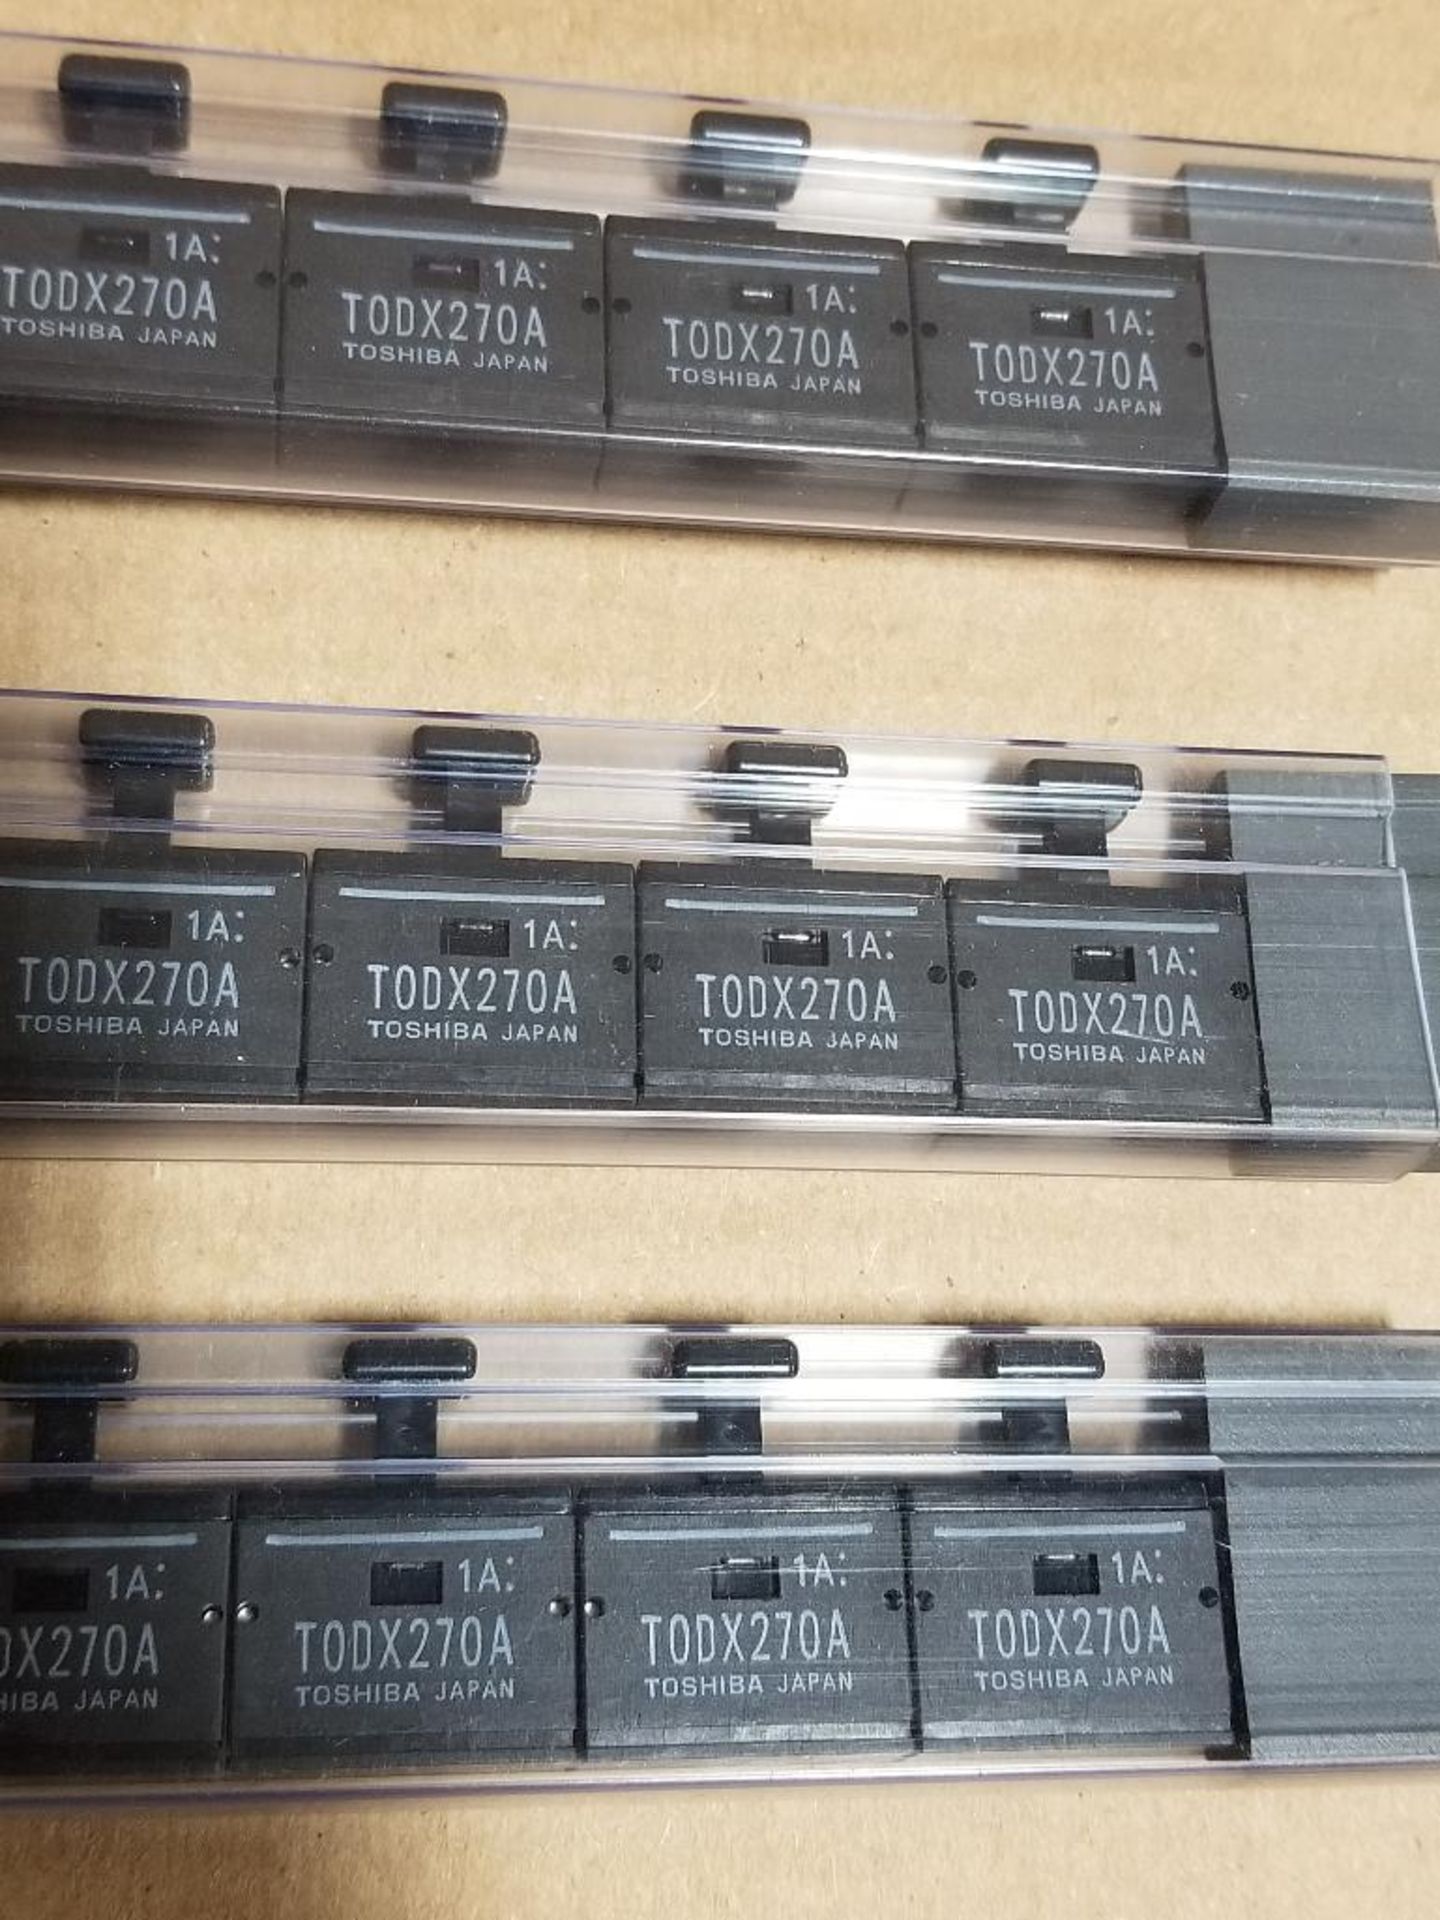 45 - Toshiba fiber optic transceiver. Part number TODX270A. New in bulk pack. - Image 2 of 2